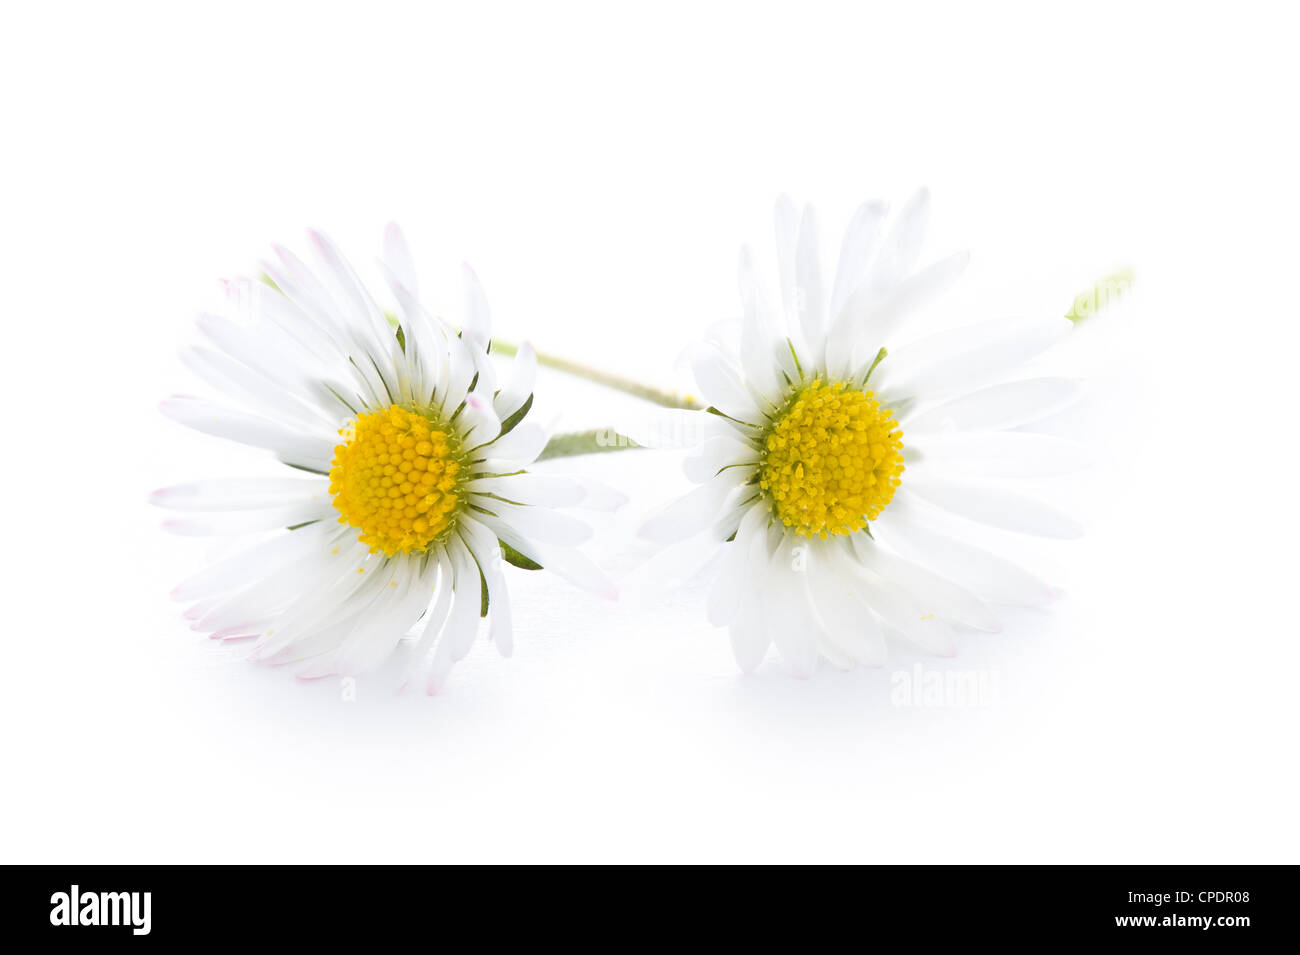 two daisy flowers isolated on a white background Stock Photo